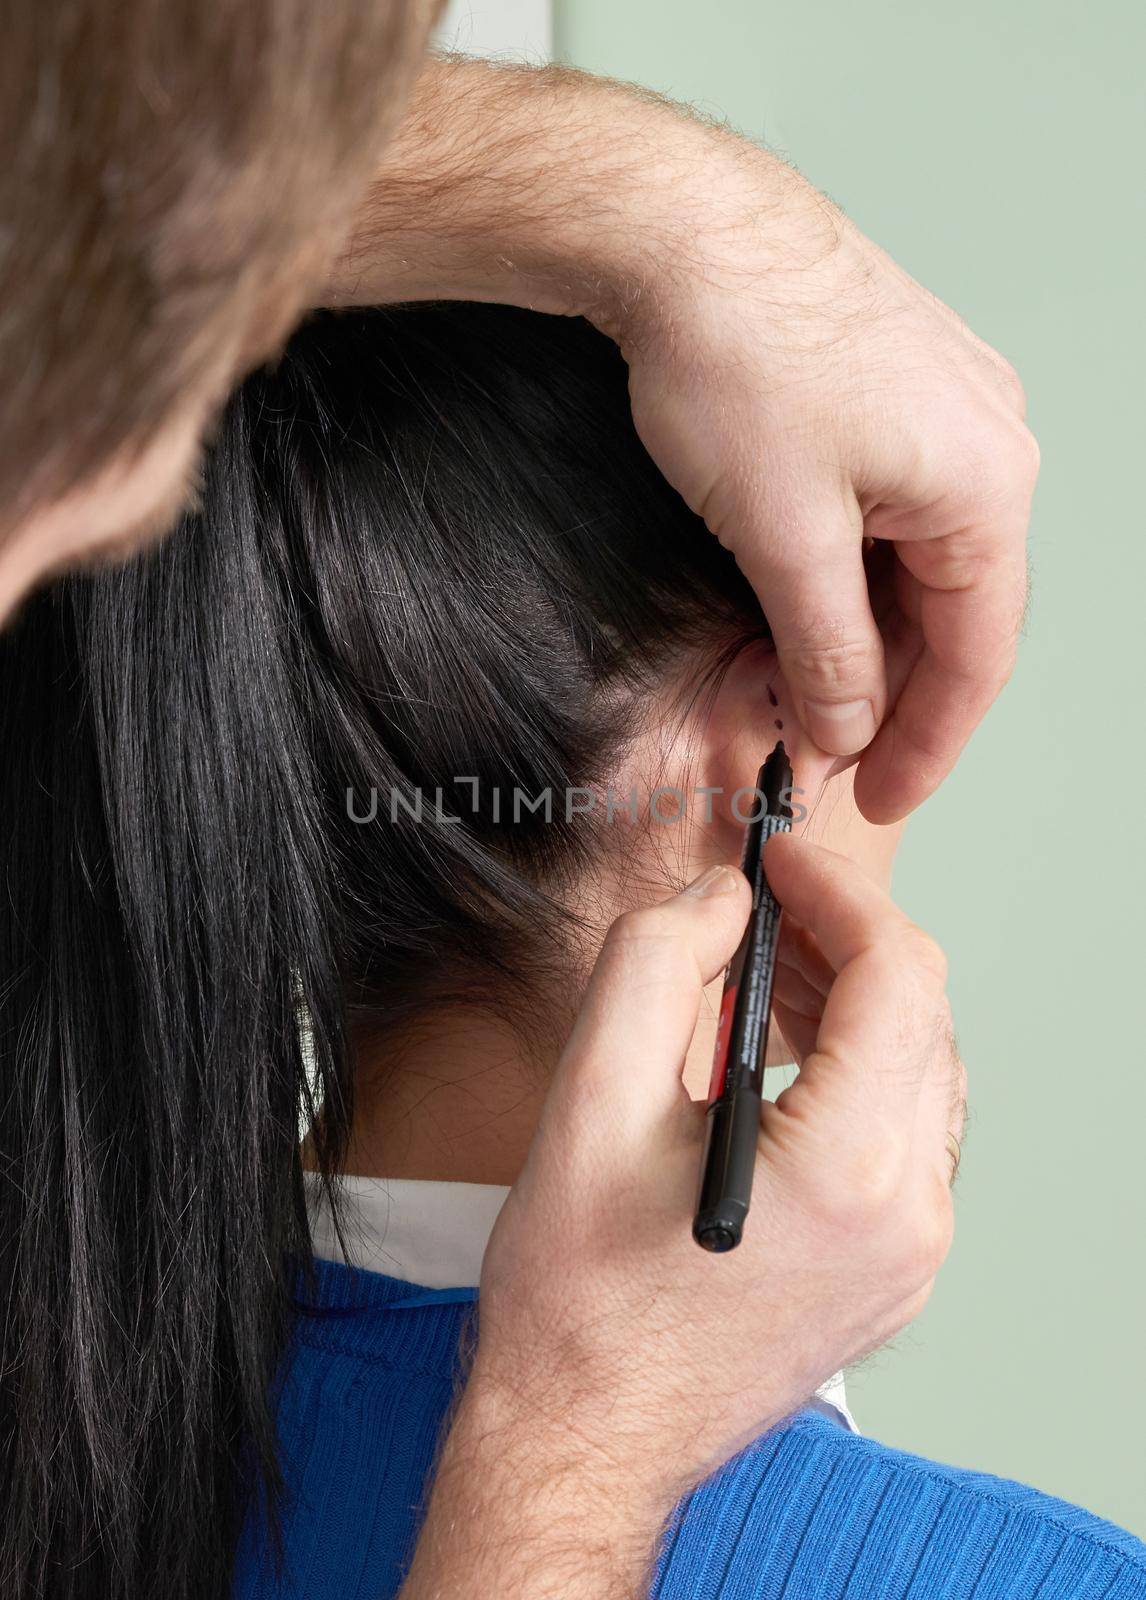 Plastic surgeon examines ear of patient before plastic surgery by Mariakray